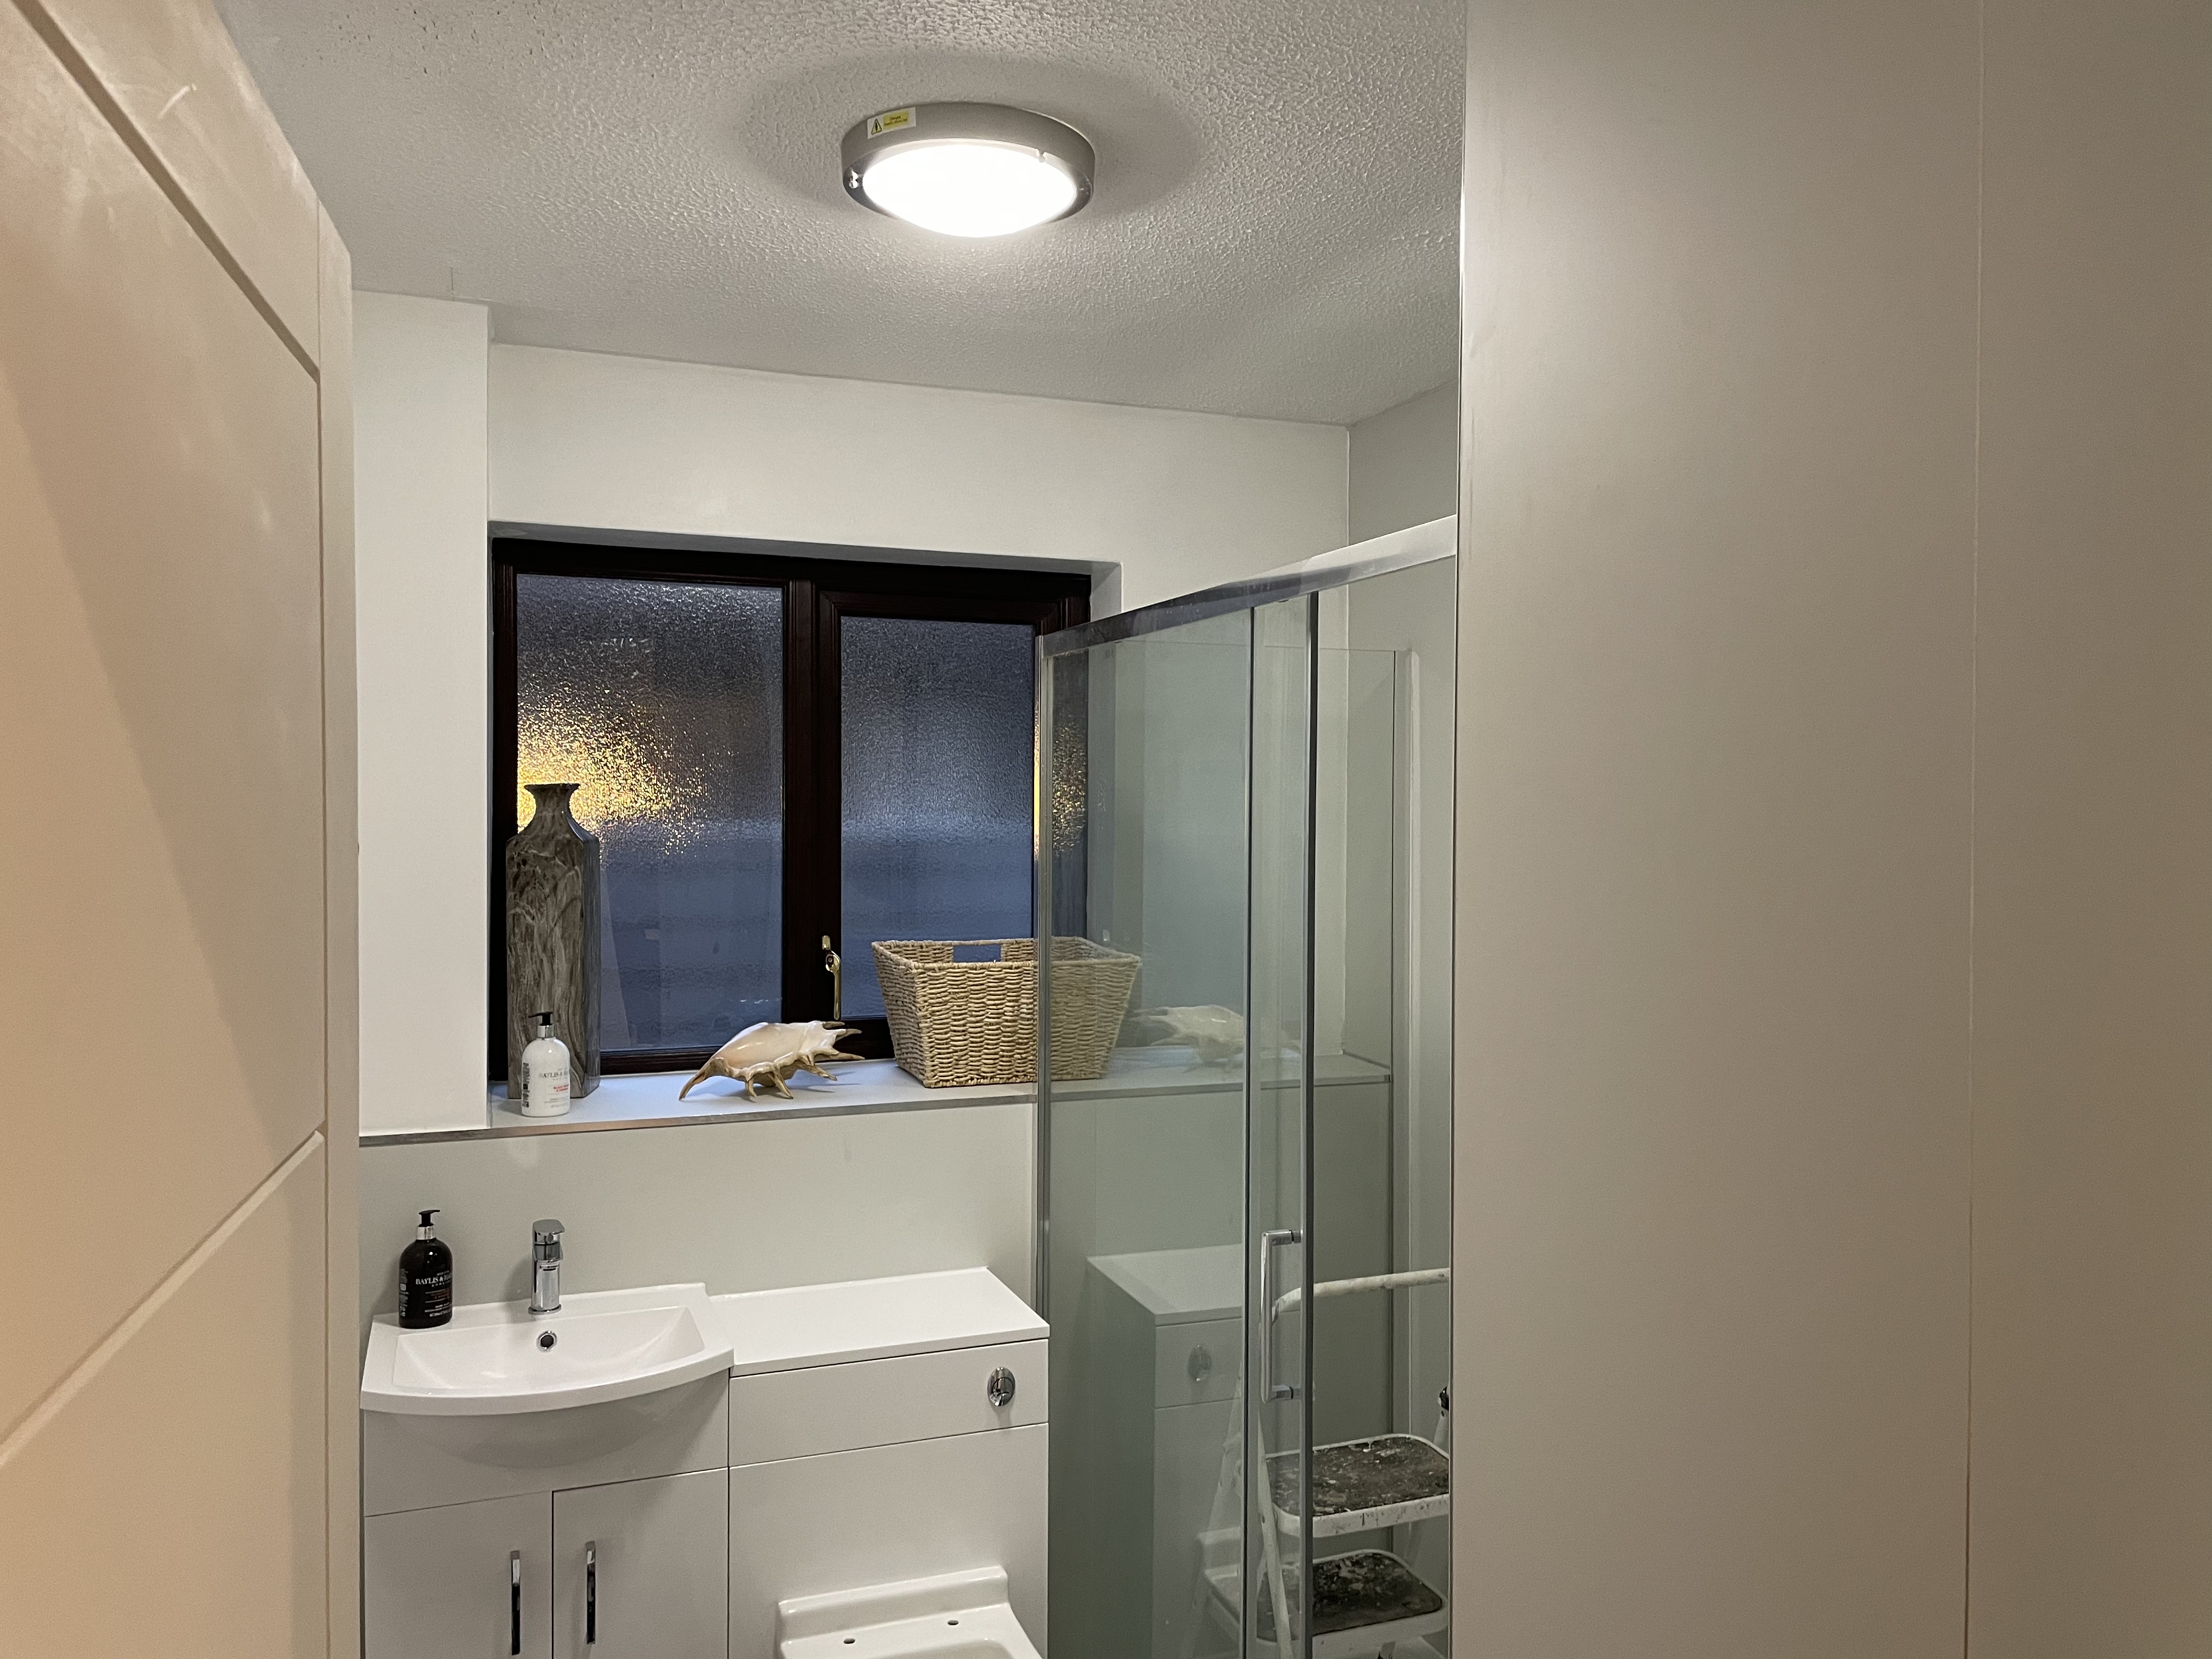 Bathroom Electrics completed by registered electricians (Perform electrical)